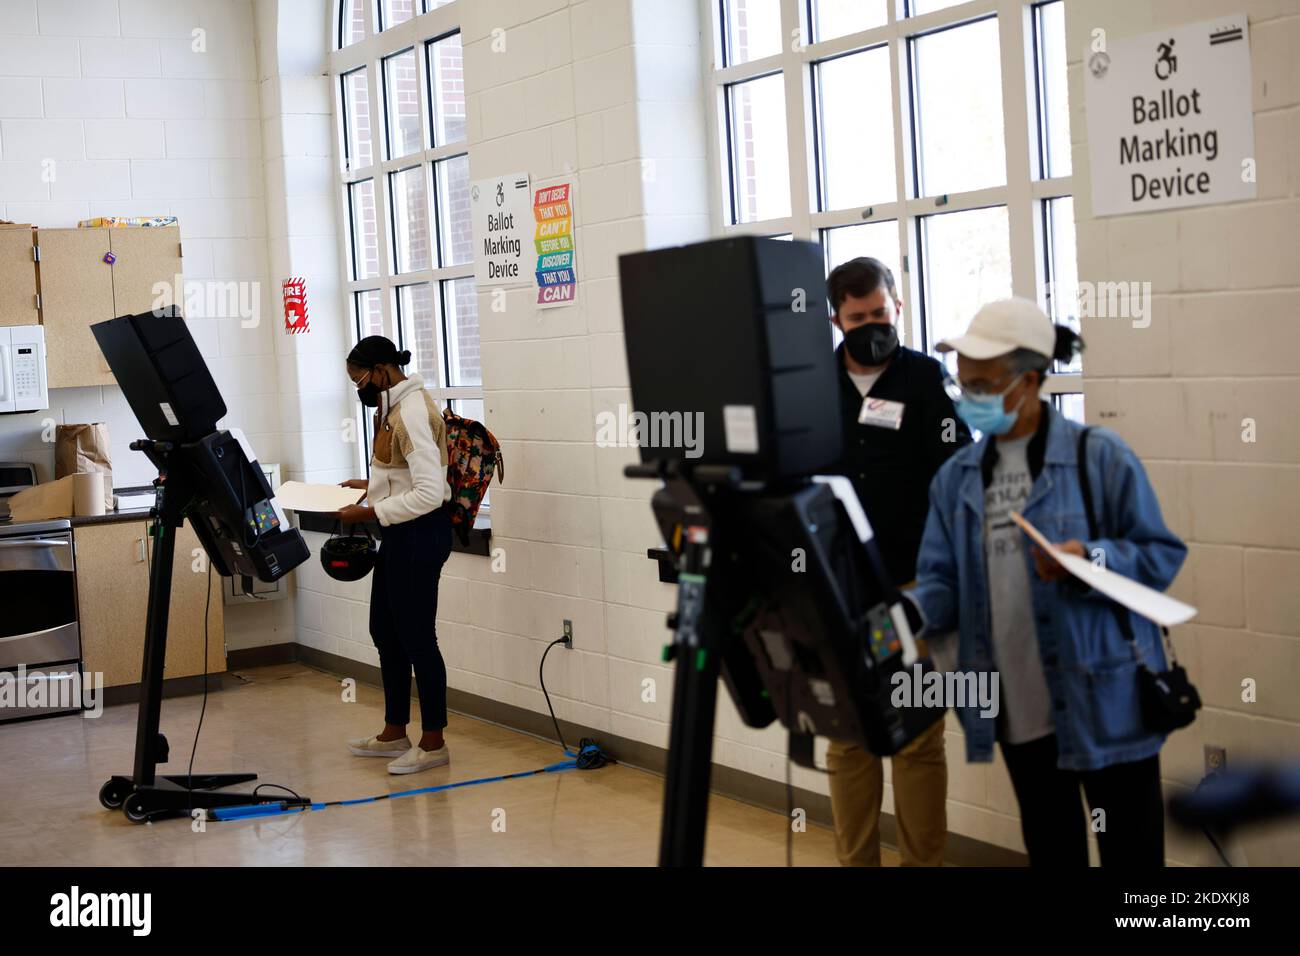 Washington, USA. 9th Nov, 2022. Voters are seen at a polling station in Washington, DC, the United States, on Nov. 8, 2022. Concerned voters across the United States cast their ballots in the 2022 midterm elections on Tuesday. Credit: Ting Shen/Xinhua/Alamy Live News Stock Photo